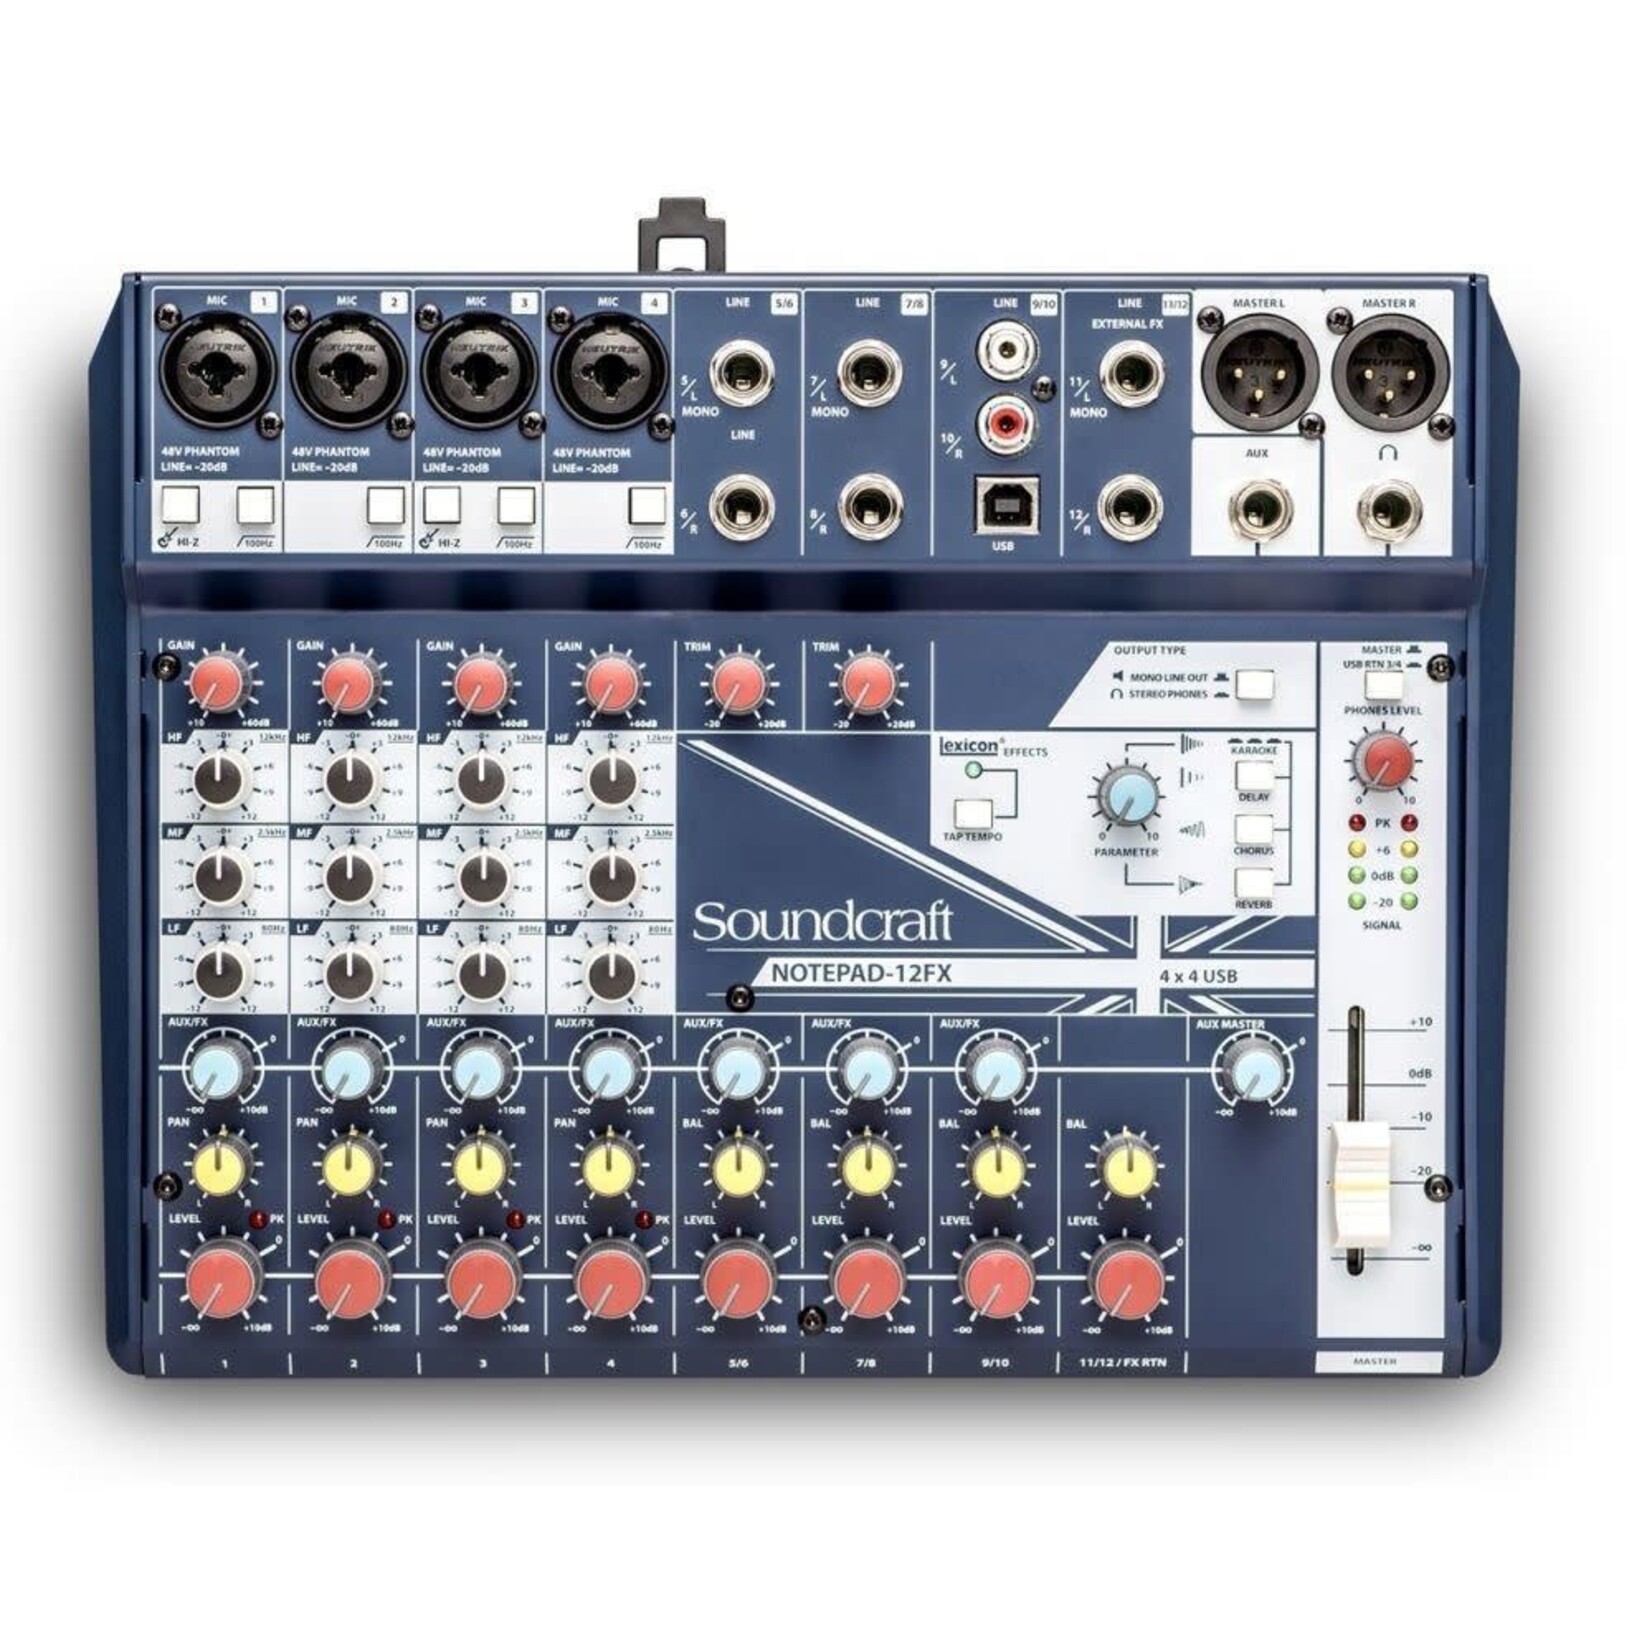 Soundcraft Soundcraft NOTEPAD-12FX Mixer with Effects and USB 12 Channel